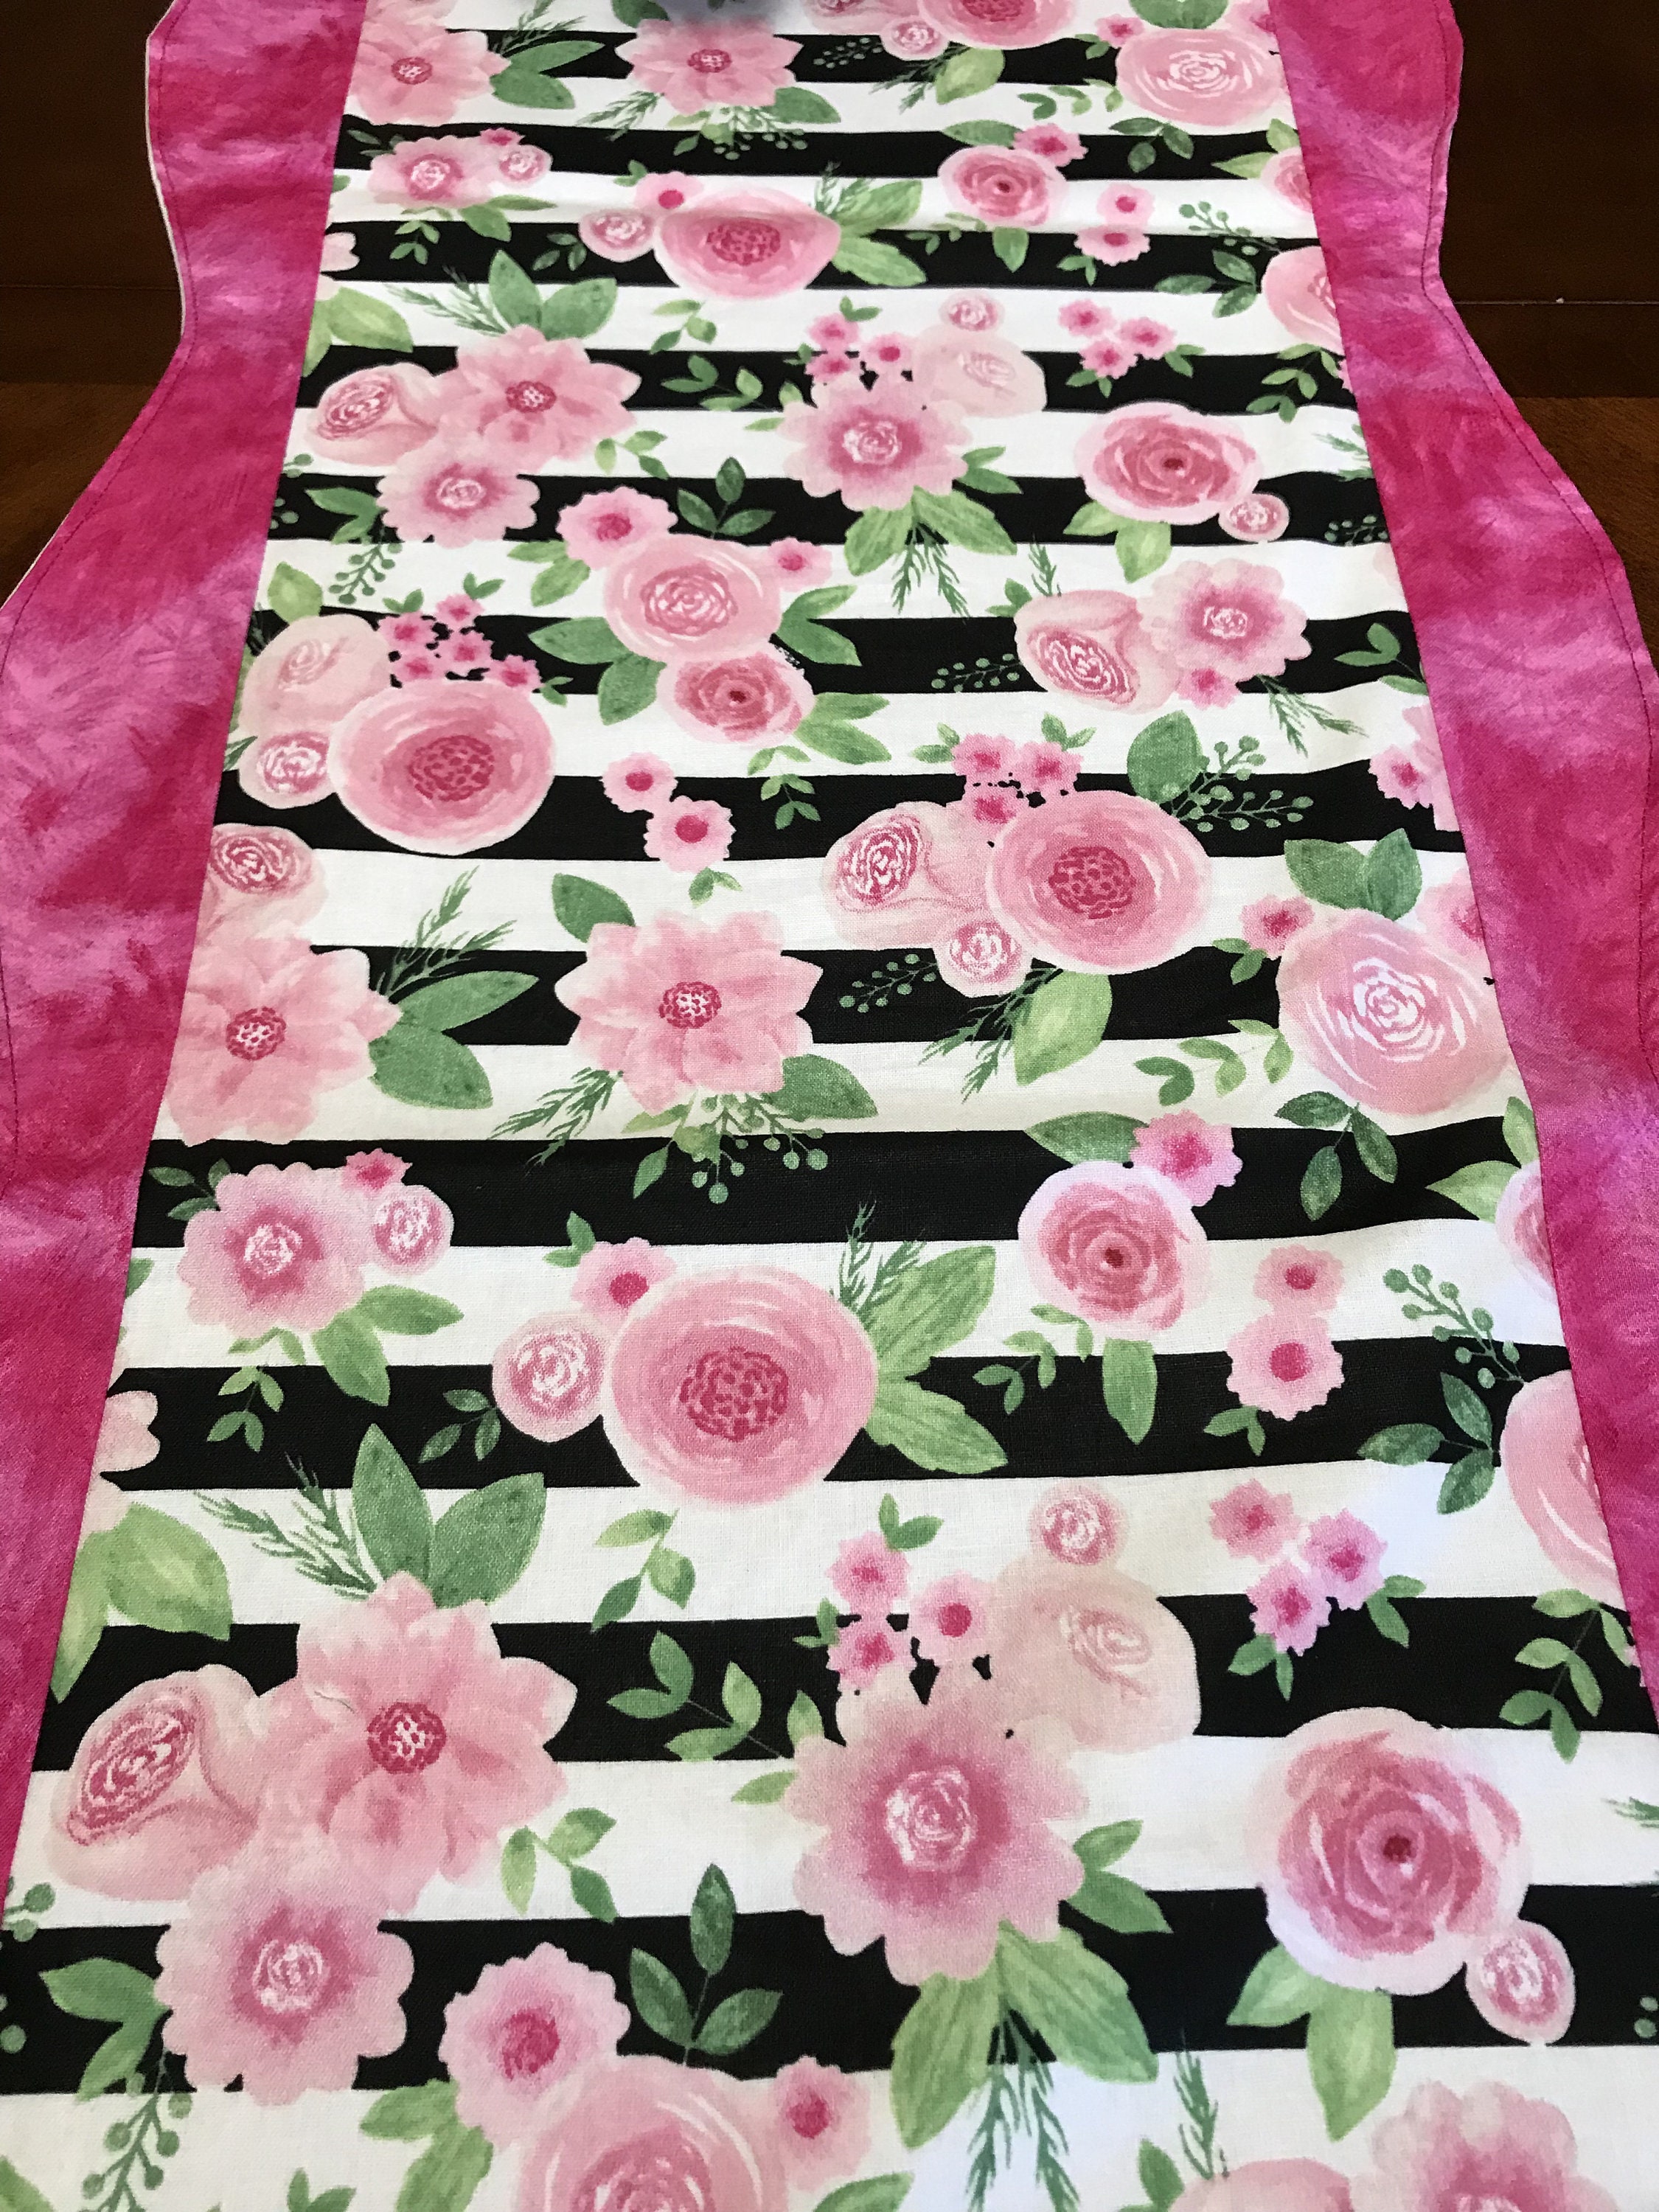 Pink Table Runner Pink Runner Pink Rose Runner Rose Table | Etsy